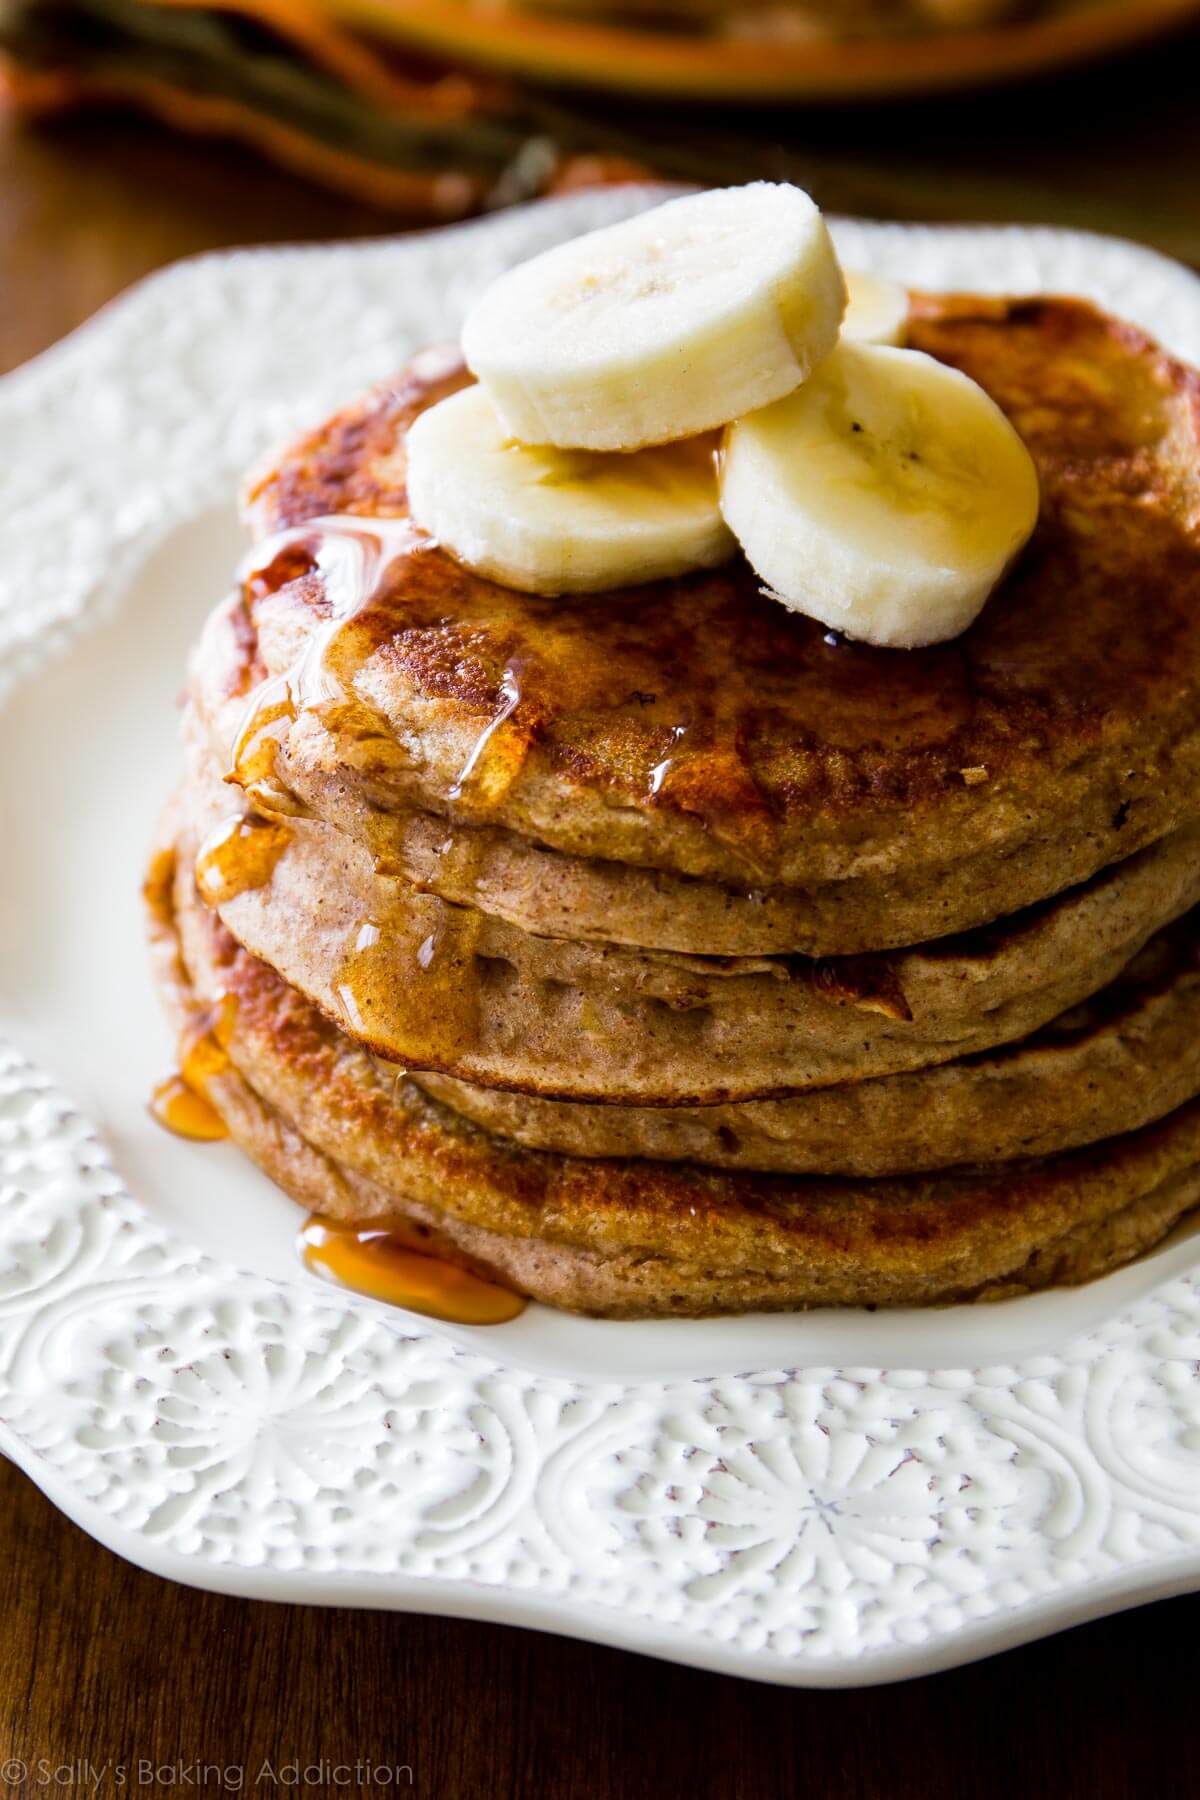 stack of whole wheat banana pancakes on a white plate topped with maple syrup and banana slices